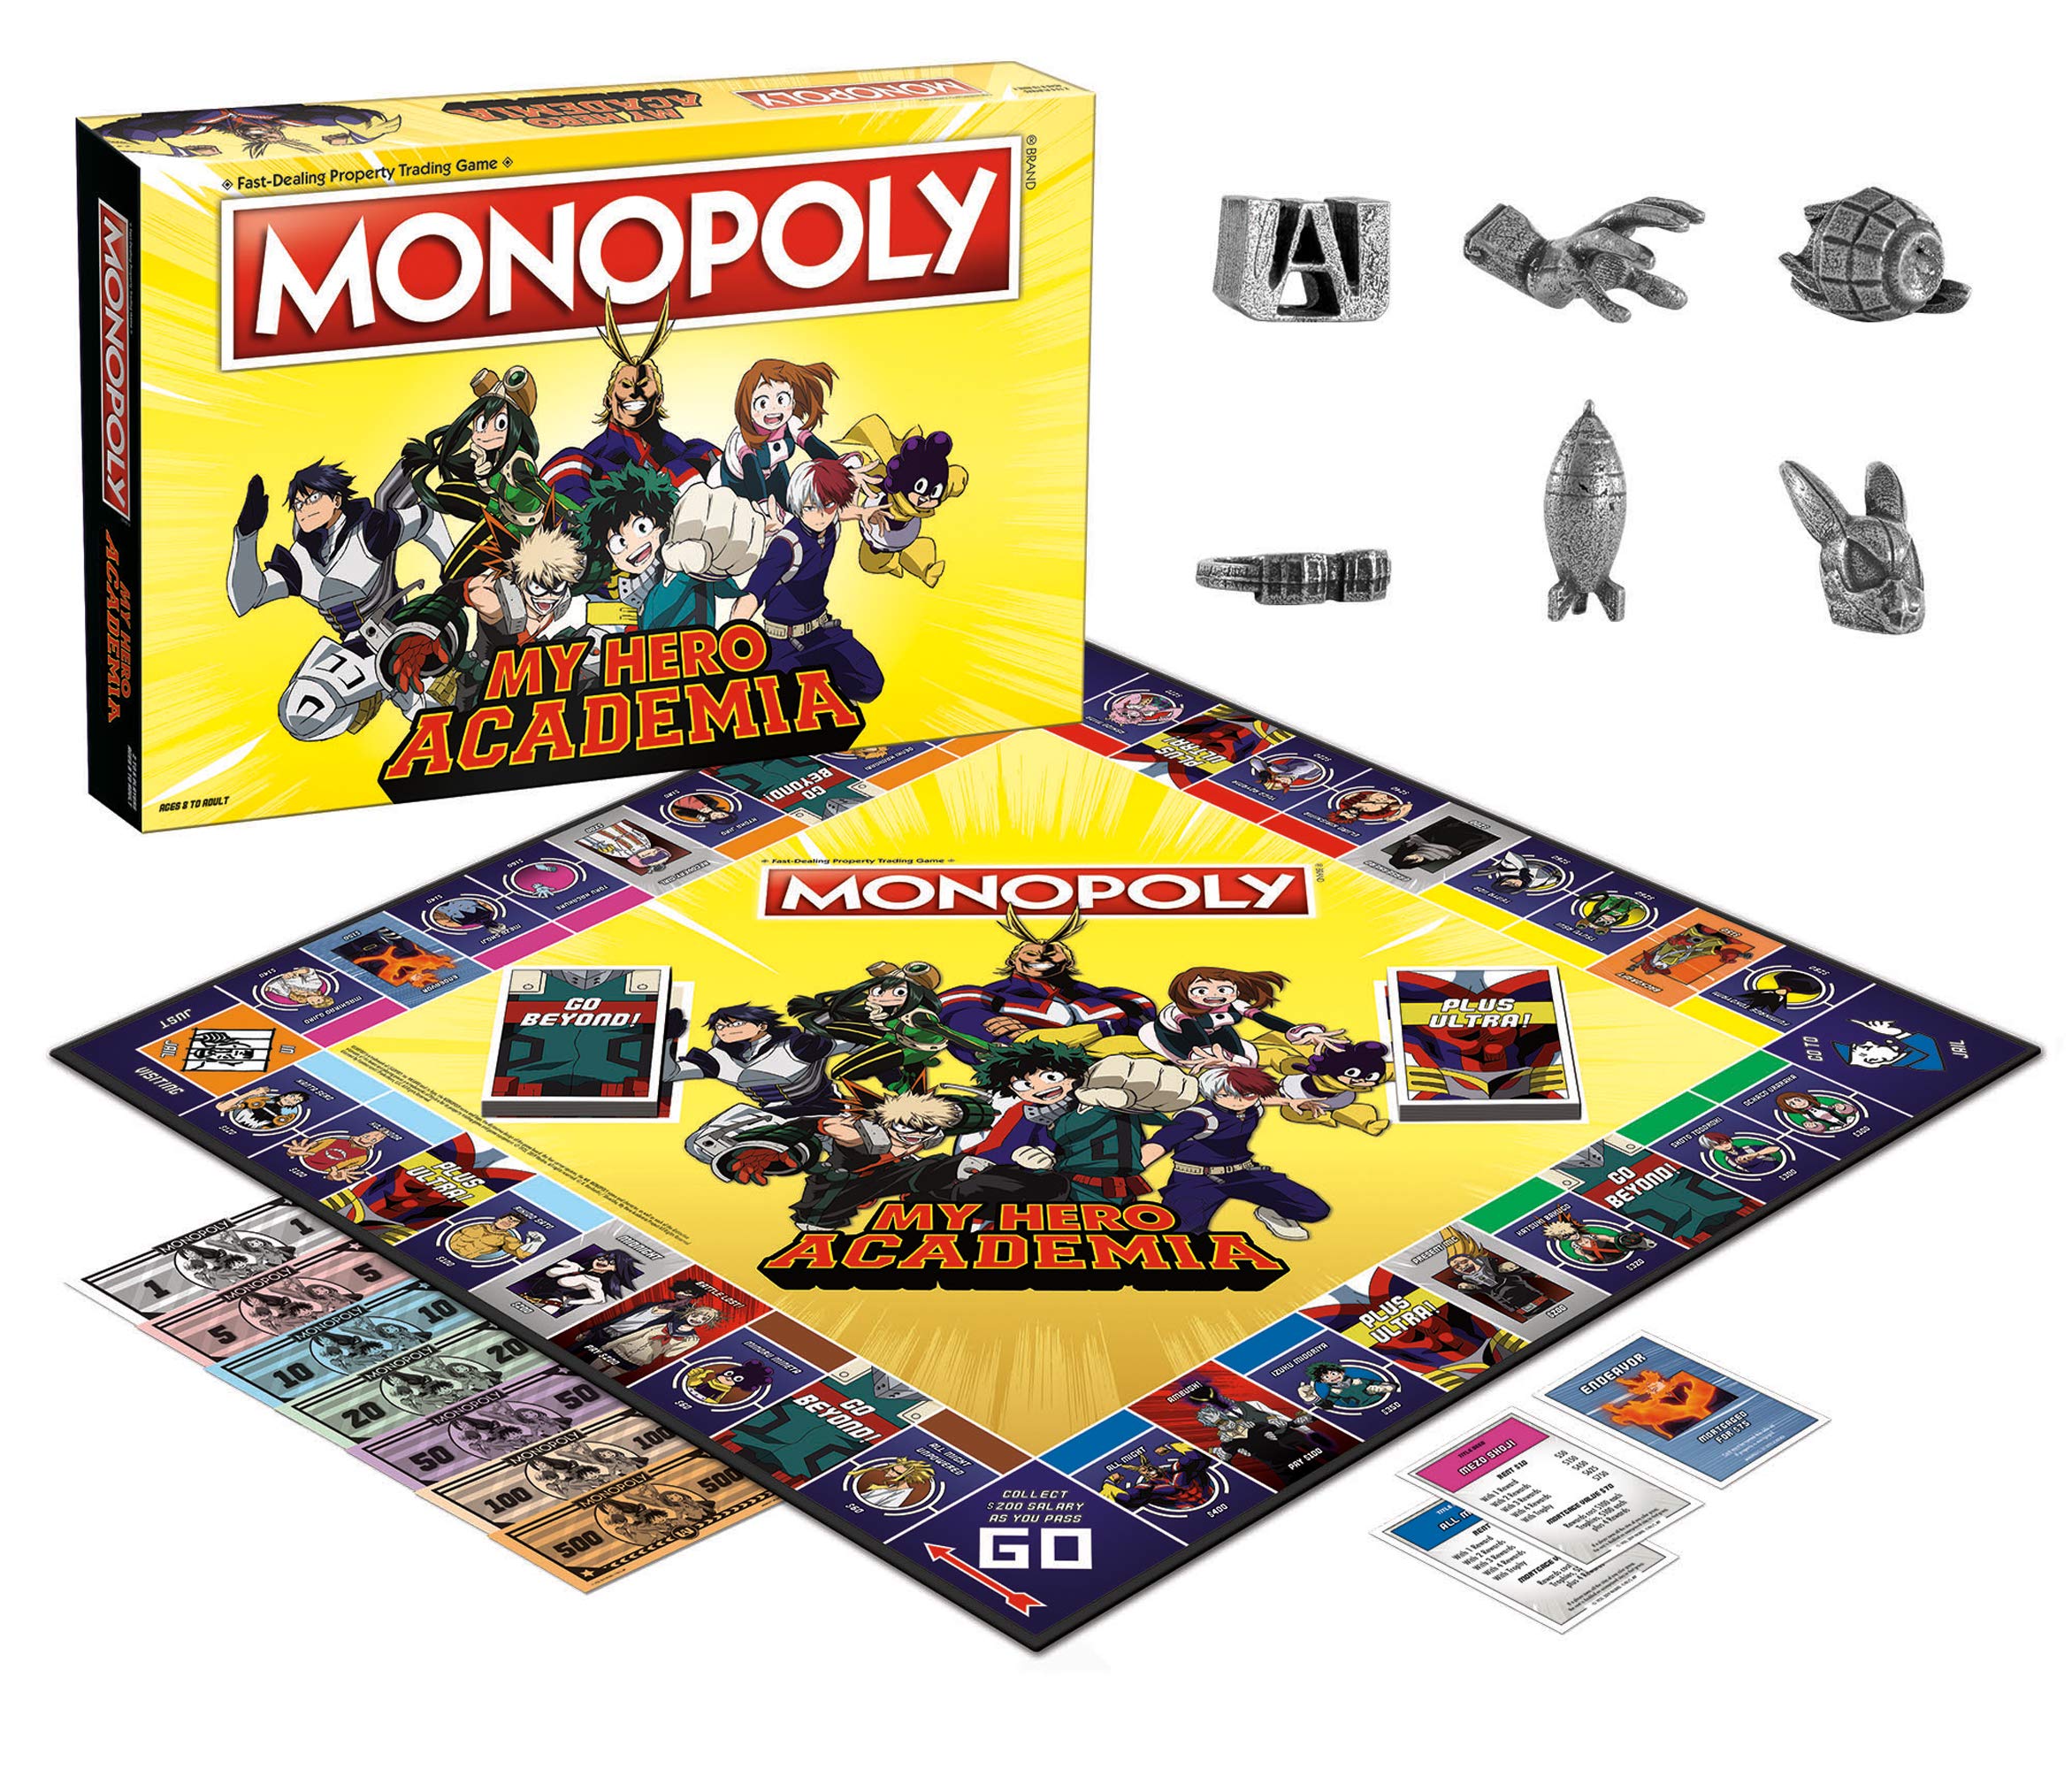 Monopoly: My Hero Academia Board Game | Buy, Sell, Trade Fan-Favorite Heroes from The Popular Anime Show | Classic Monopoly Game | Officially-Licensed My Hero Academia Merchandise